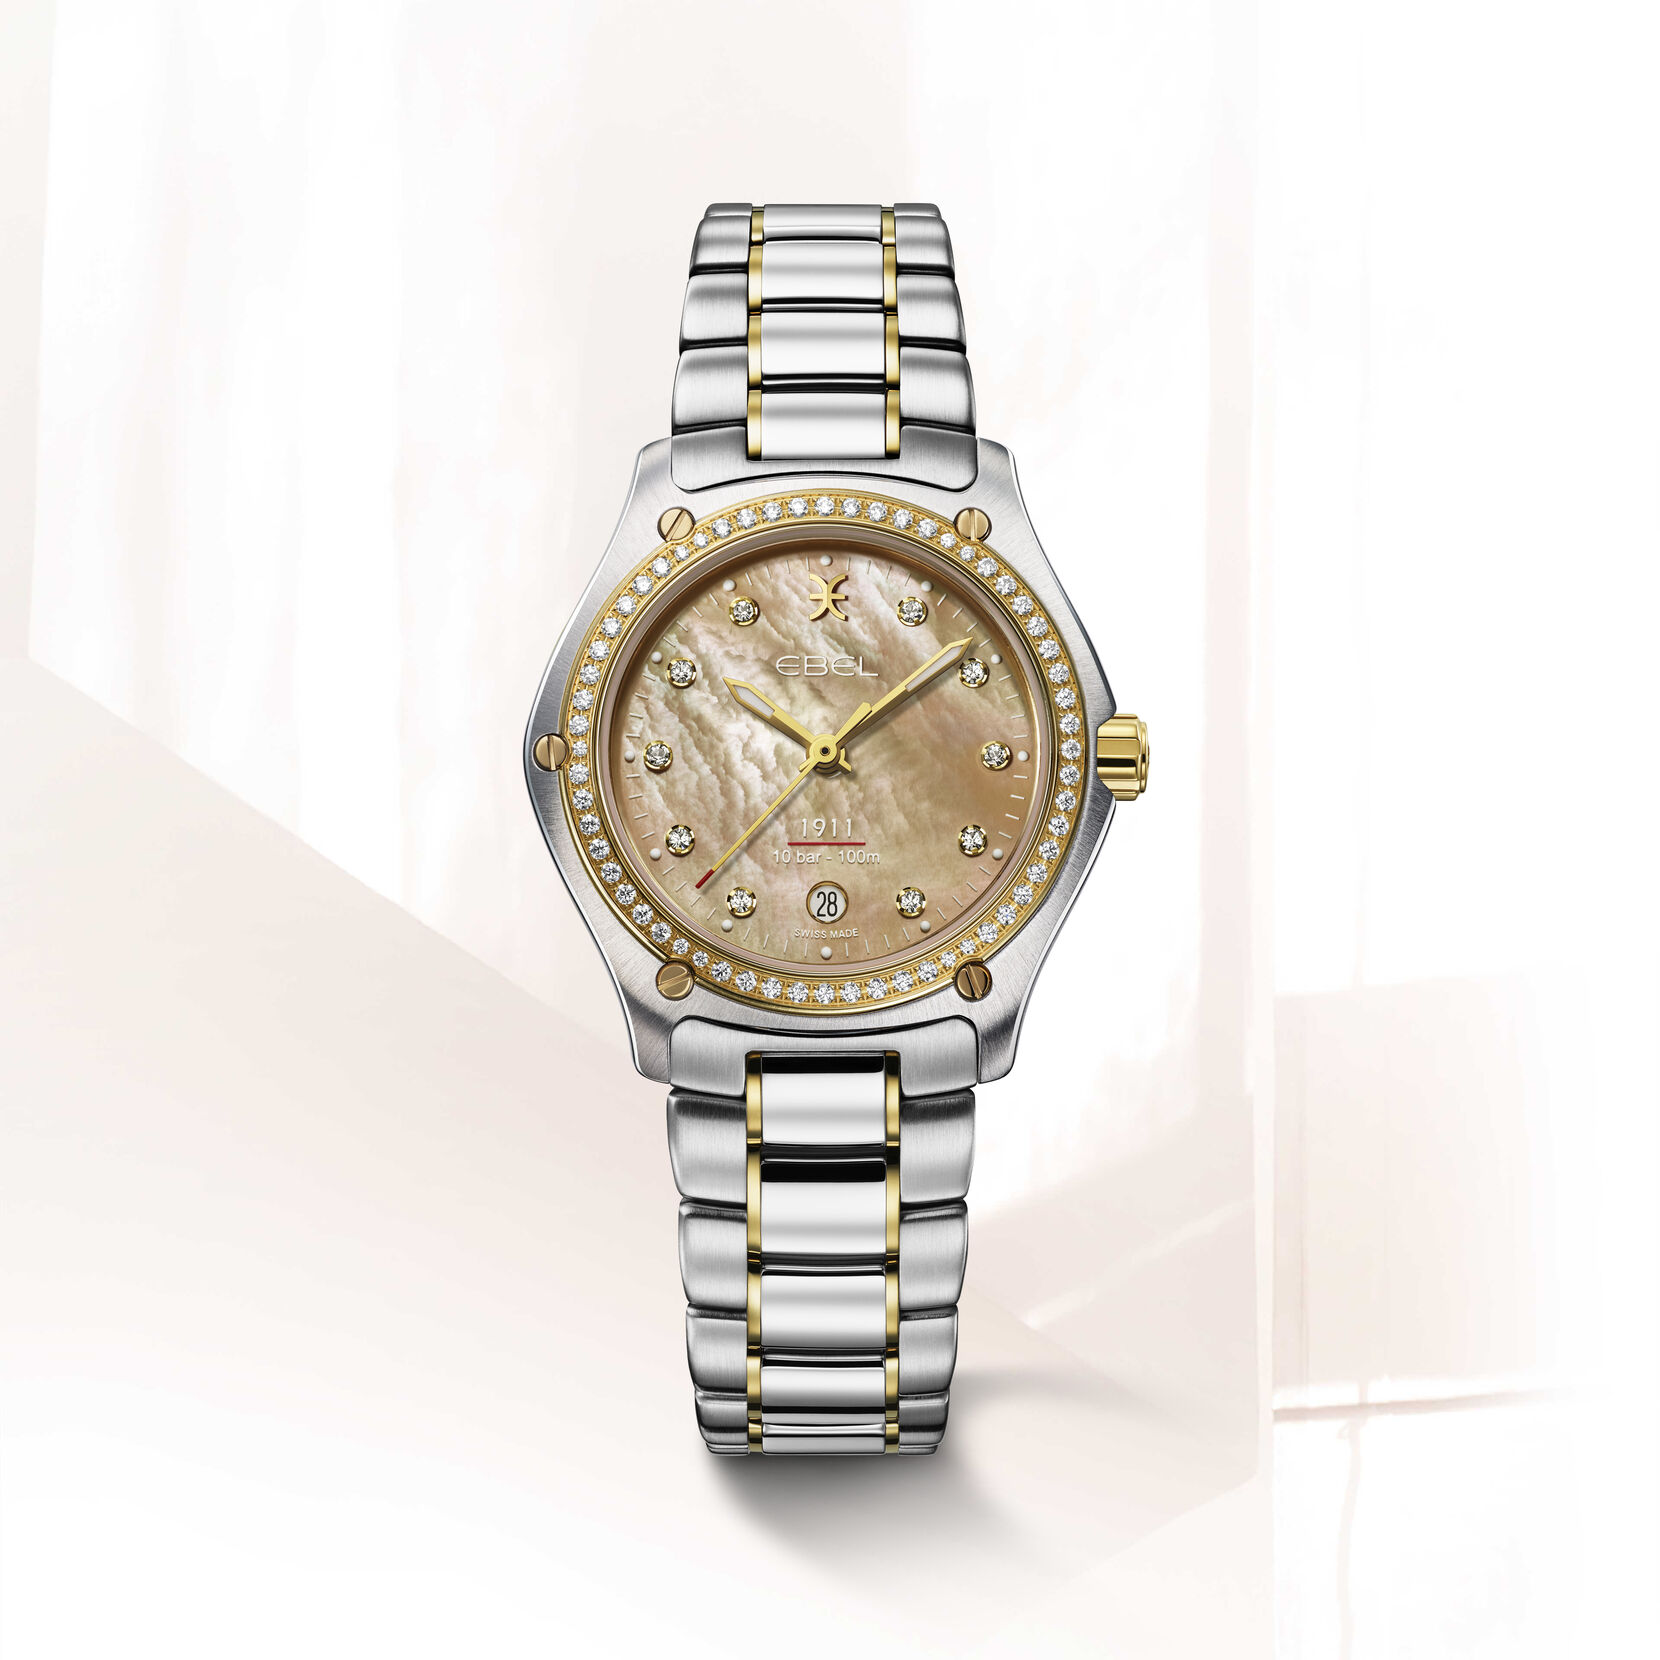 EBEL | Women's Watch EBEL 1911, stainless steel and 18K yellow gold